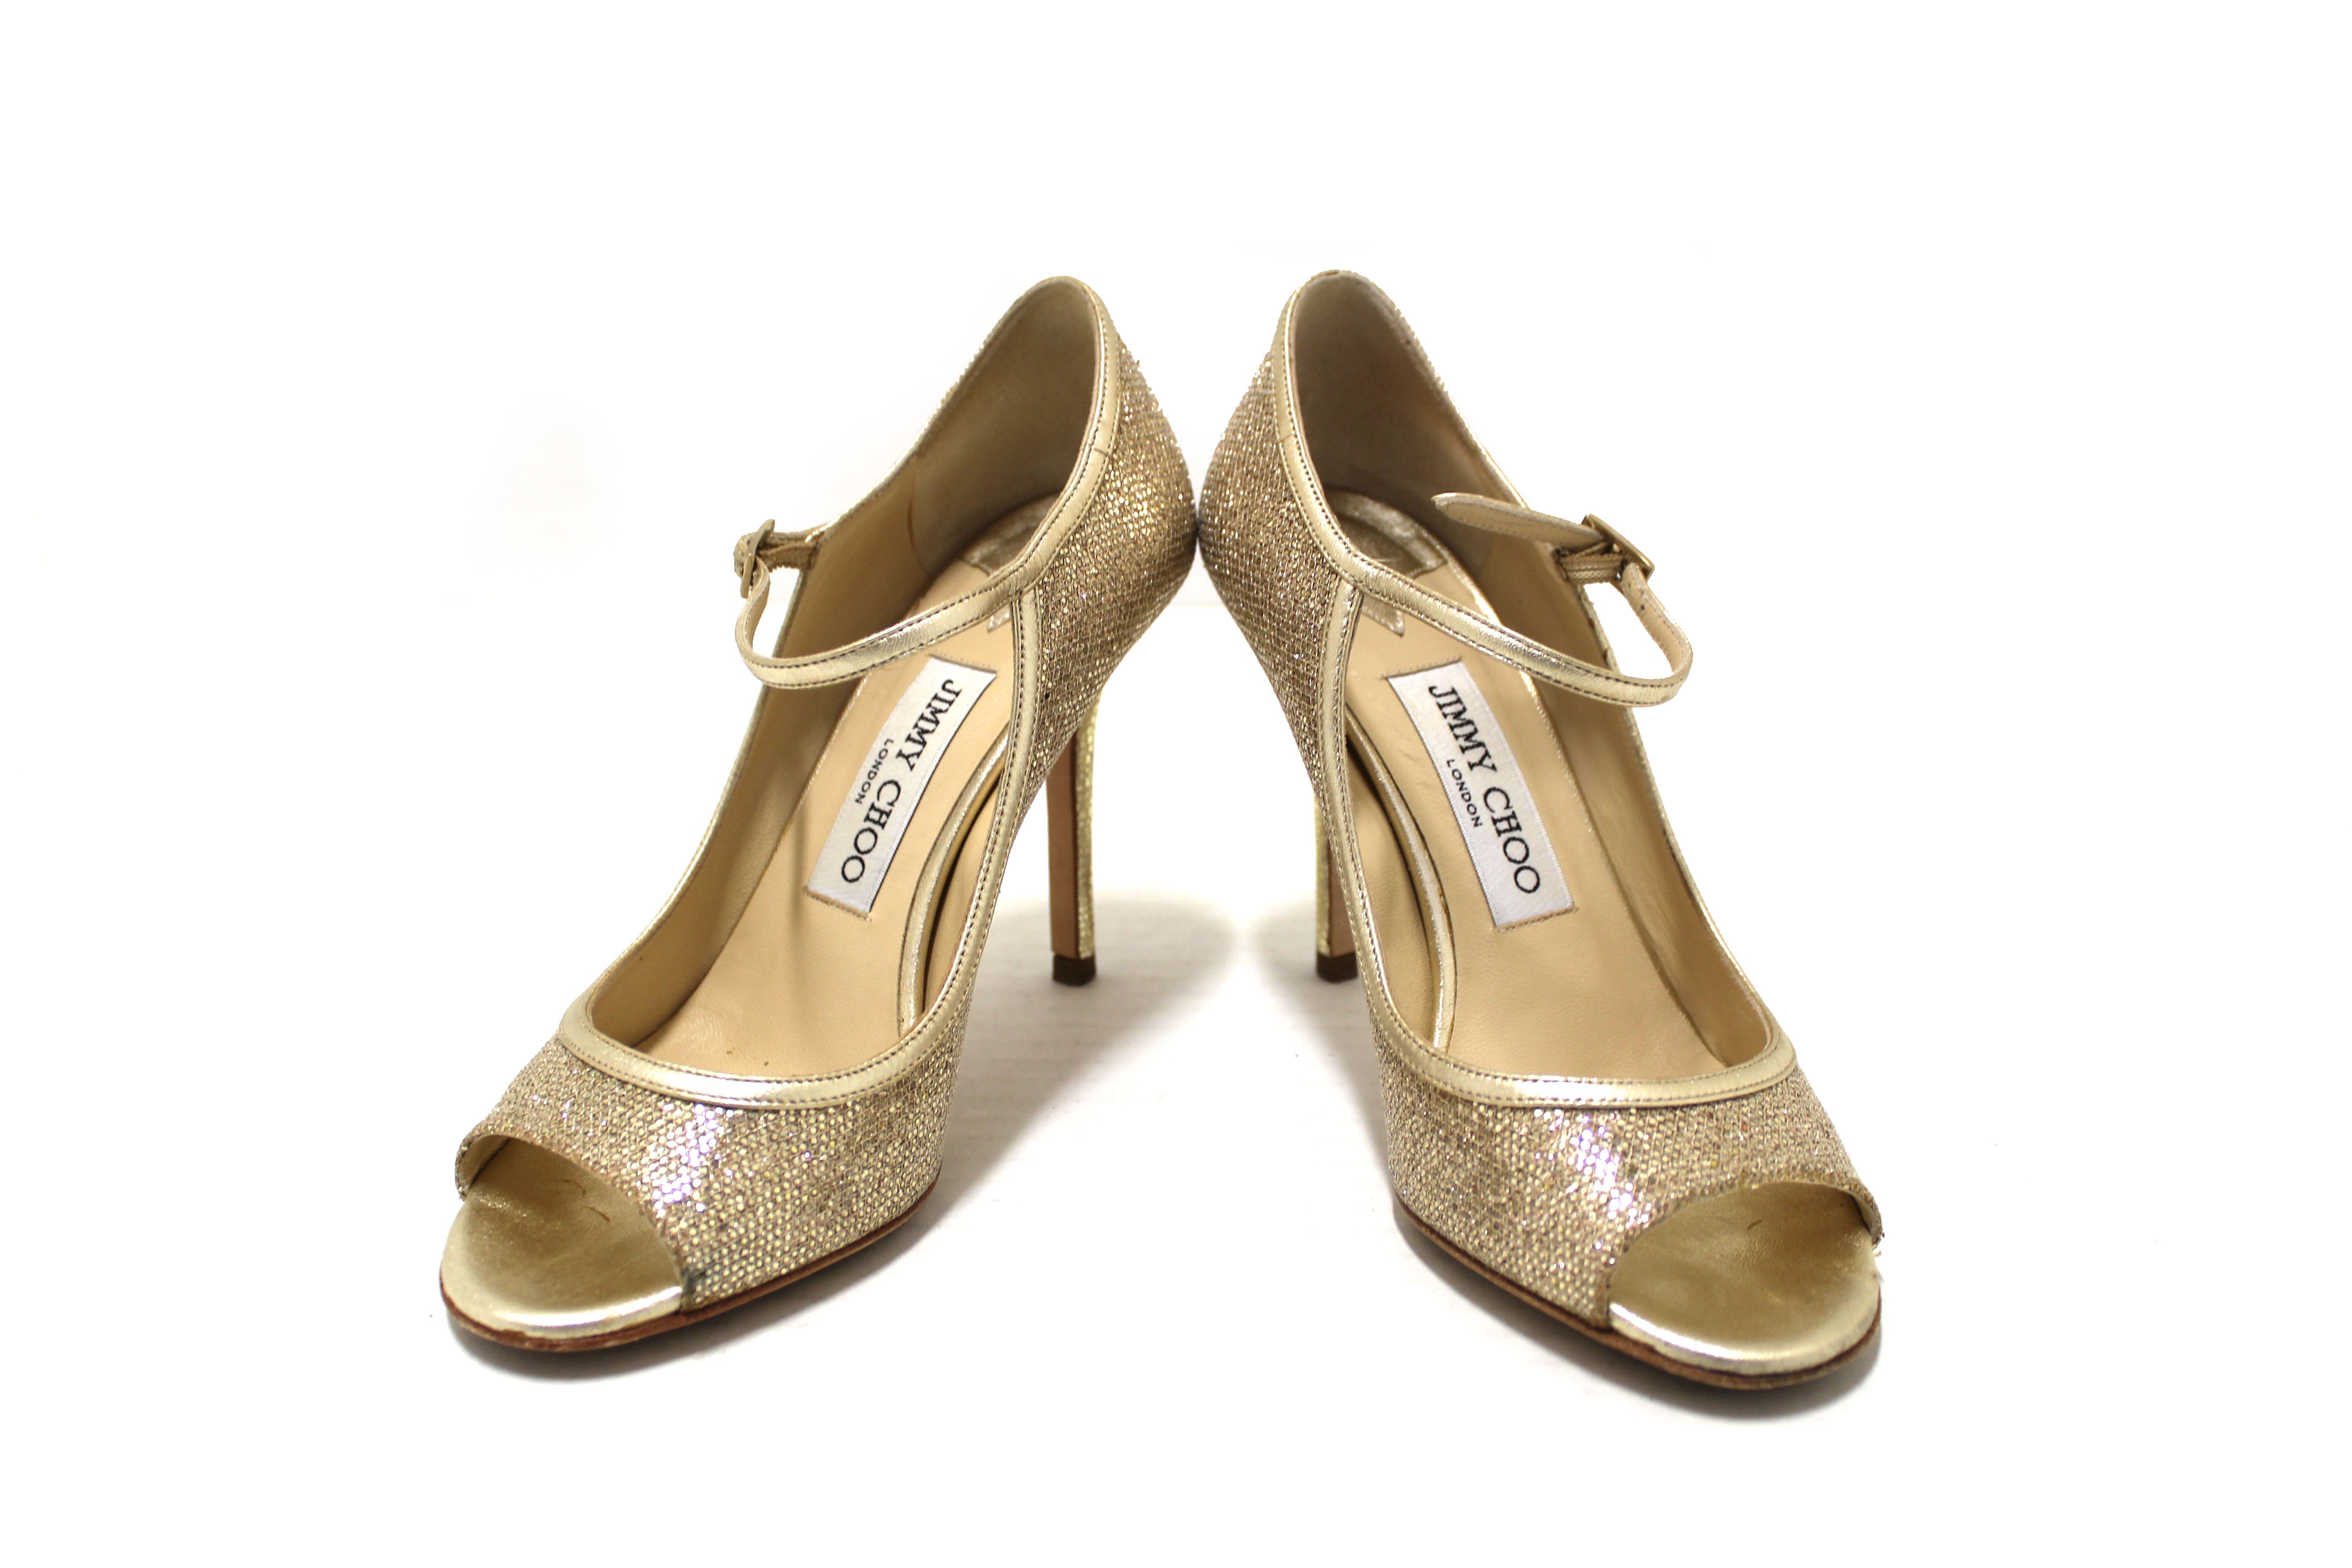 Authentic Jimmy Champagne Gold Glitter Fabric Pump Heel Sandal Size 36.5